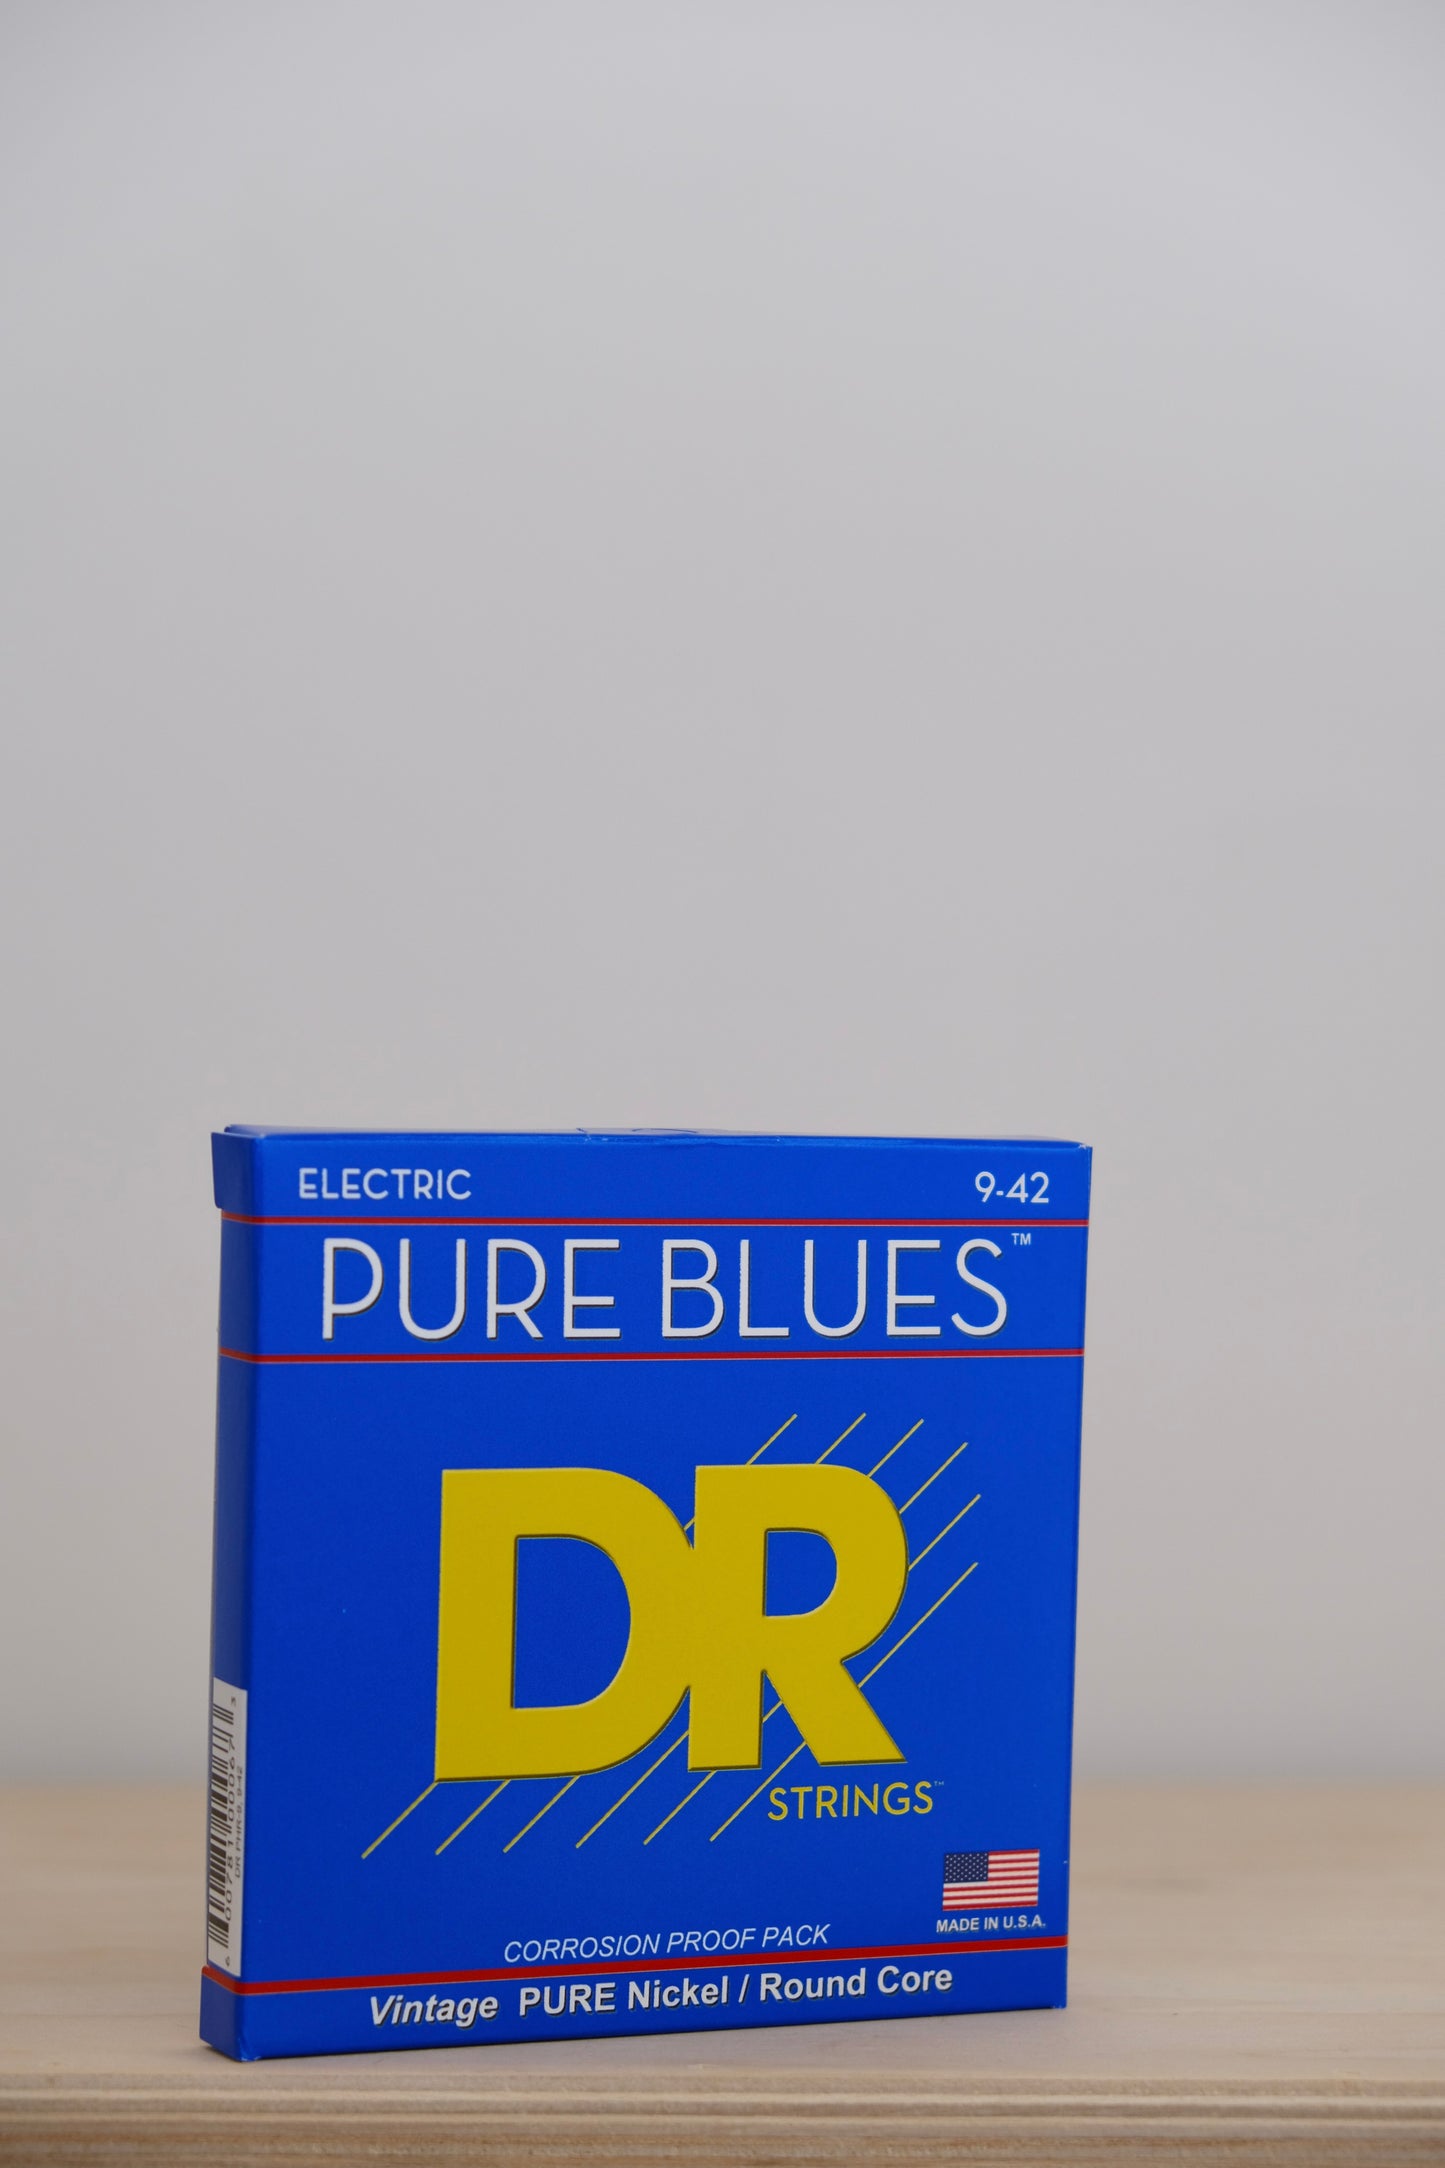 DR PURE BLUES™ - Pure Nickel Electric Guitar Strings: Light 9-42